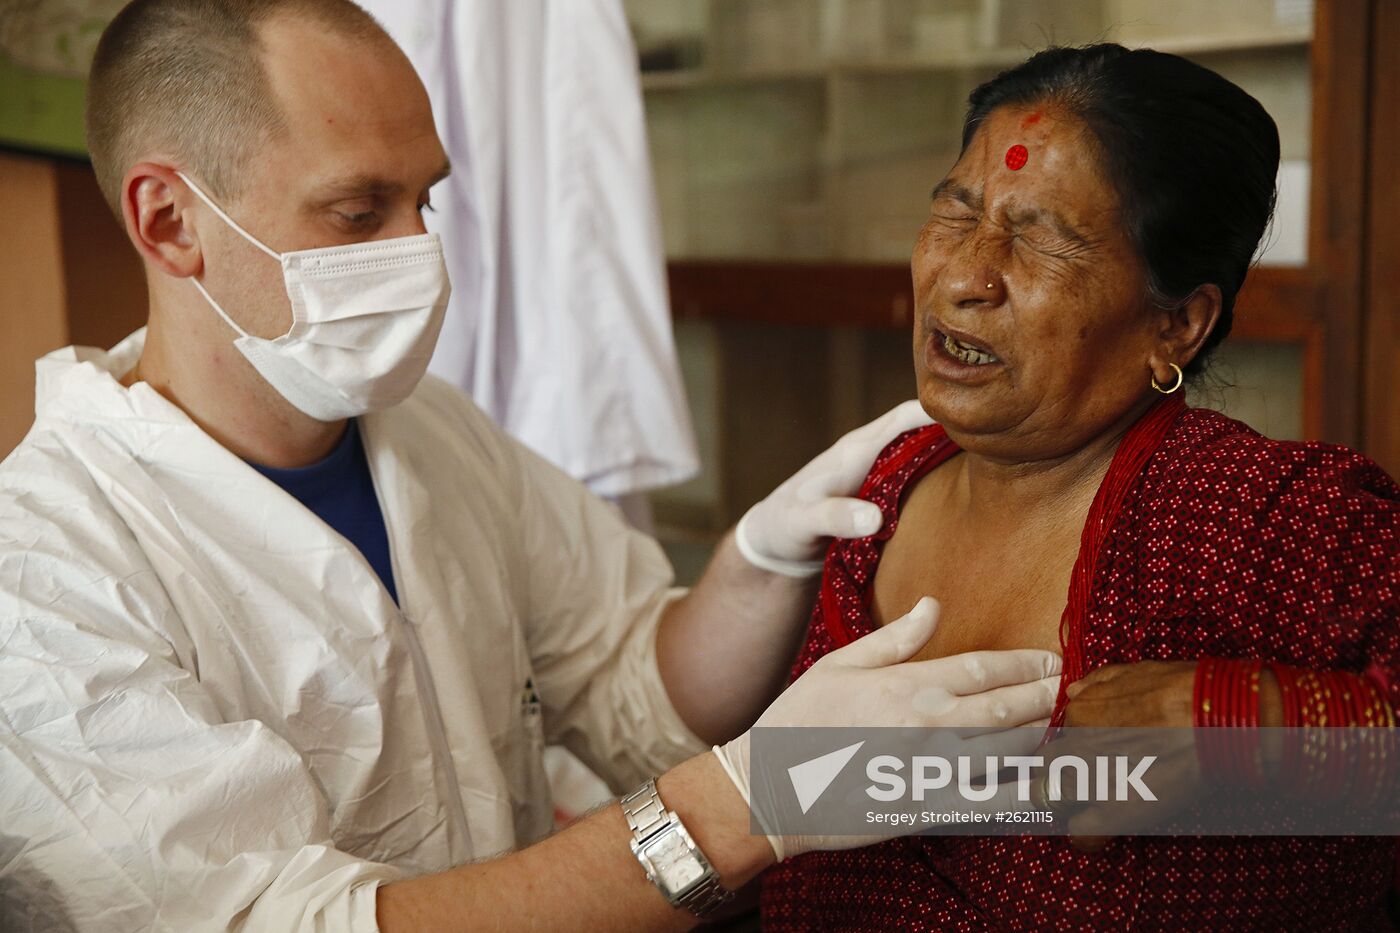 Russian doctors provide aid to Nepal residents